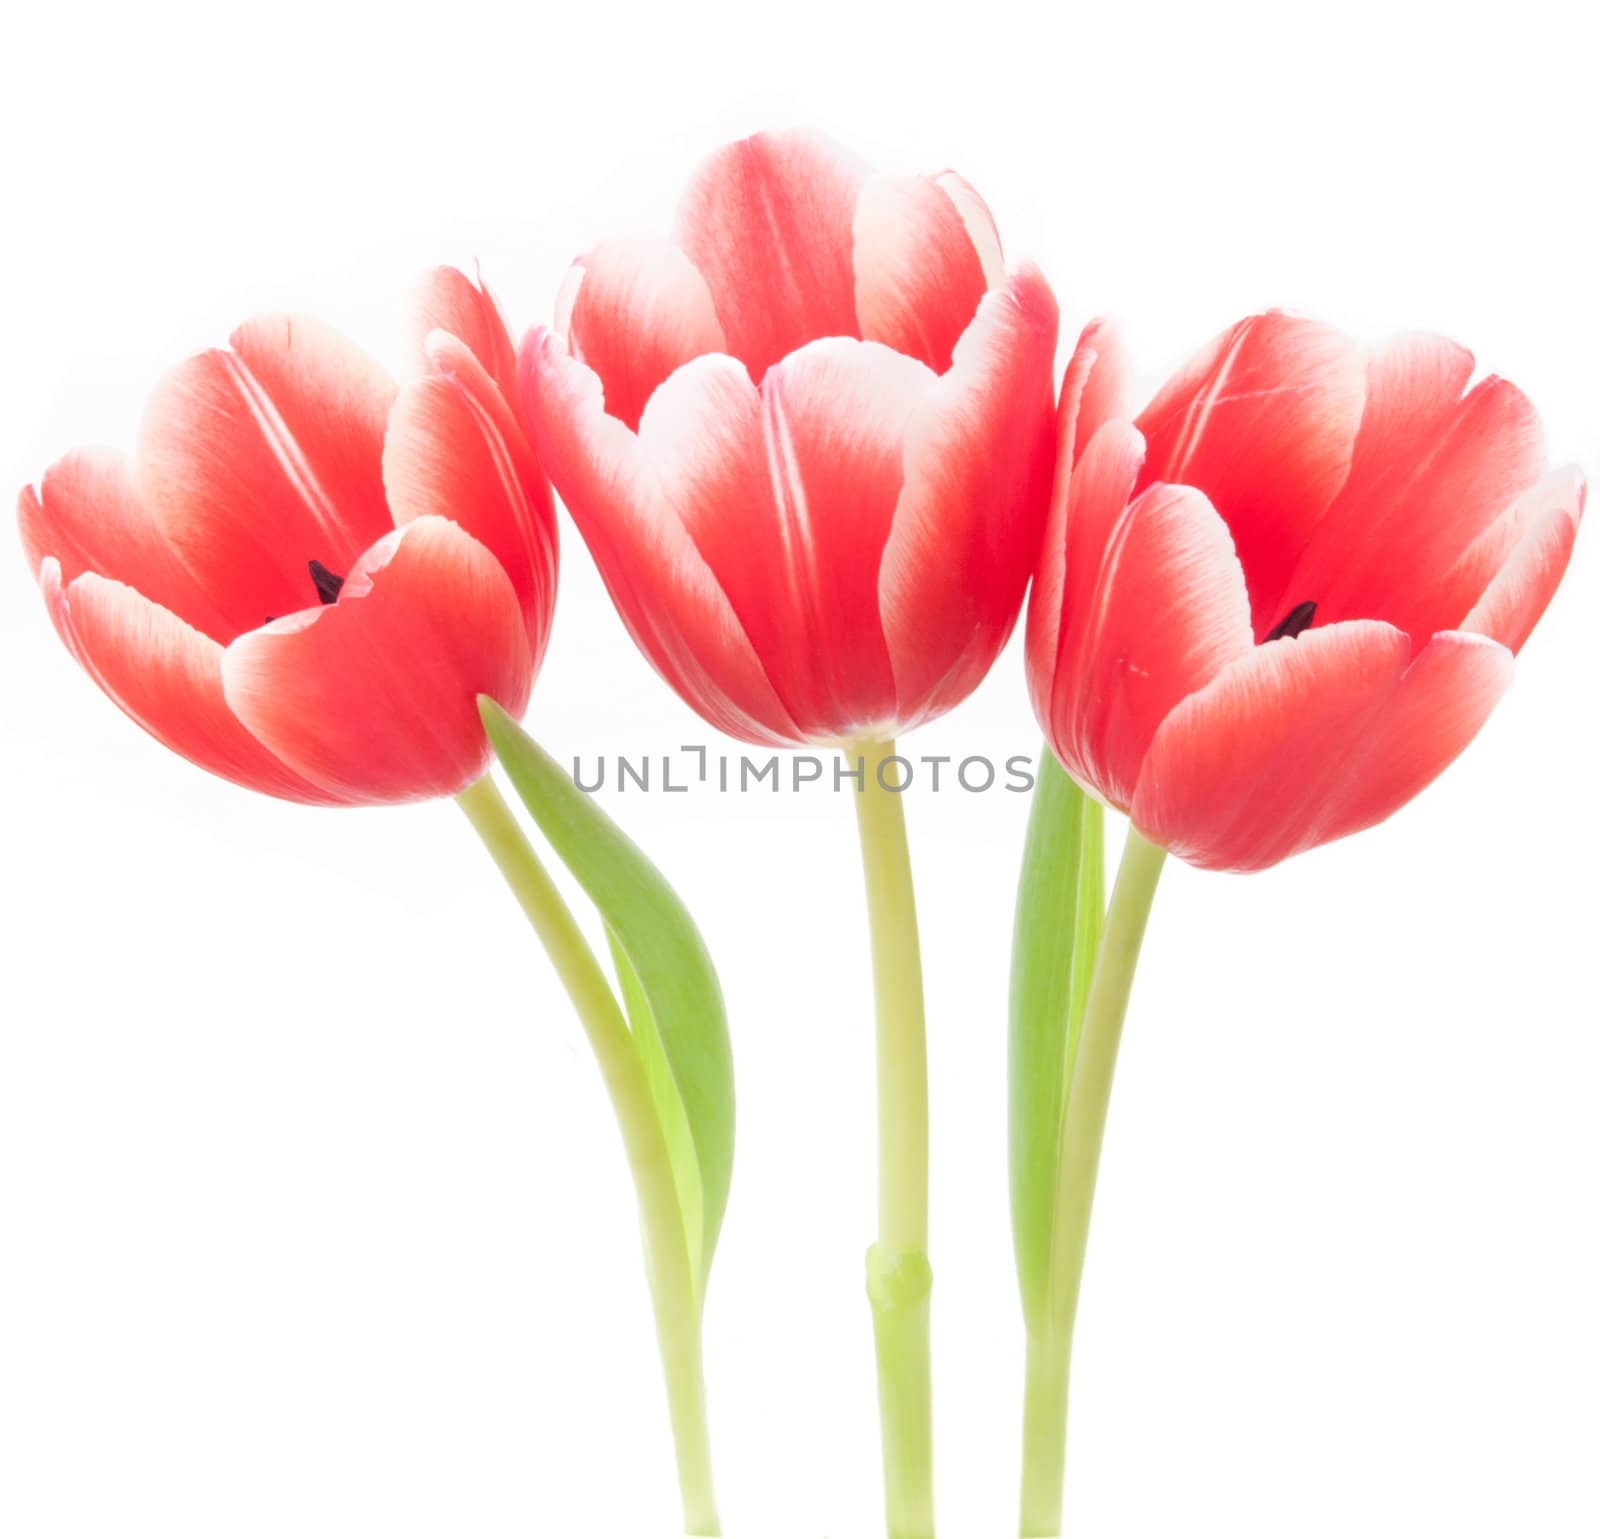 Three red and white tulips against a white background